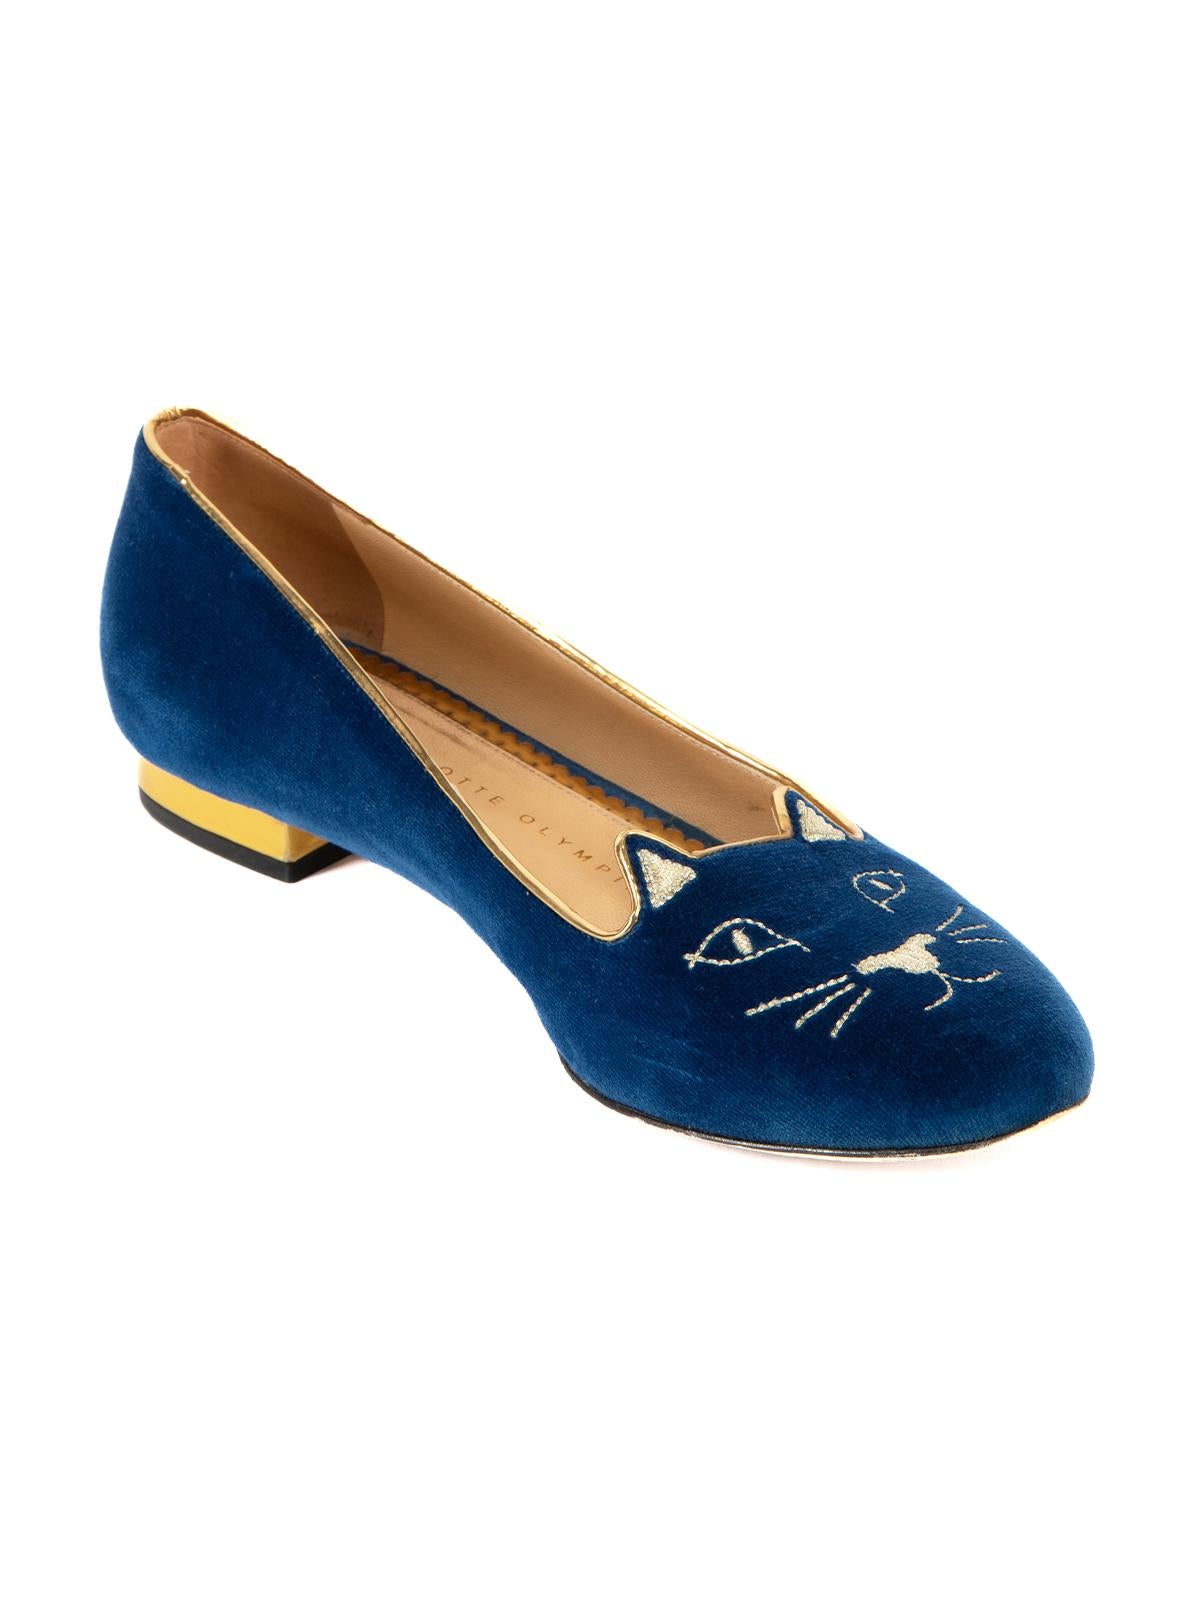 CONDITION is Very good. Minimal wear to flats is evident. Minimal wear to velvet exterior and gold material on the heel where some llight scuffs can be seen on this used Charlotte Olympa designer resale item. Details Blue Velvet Round toe Cat face